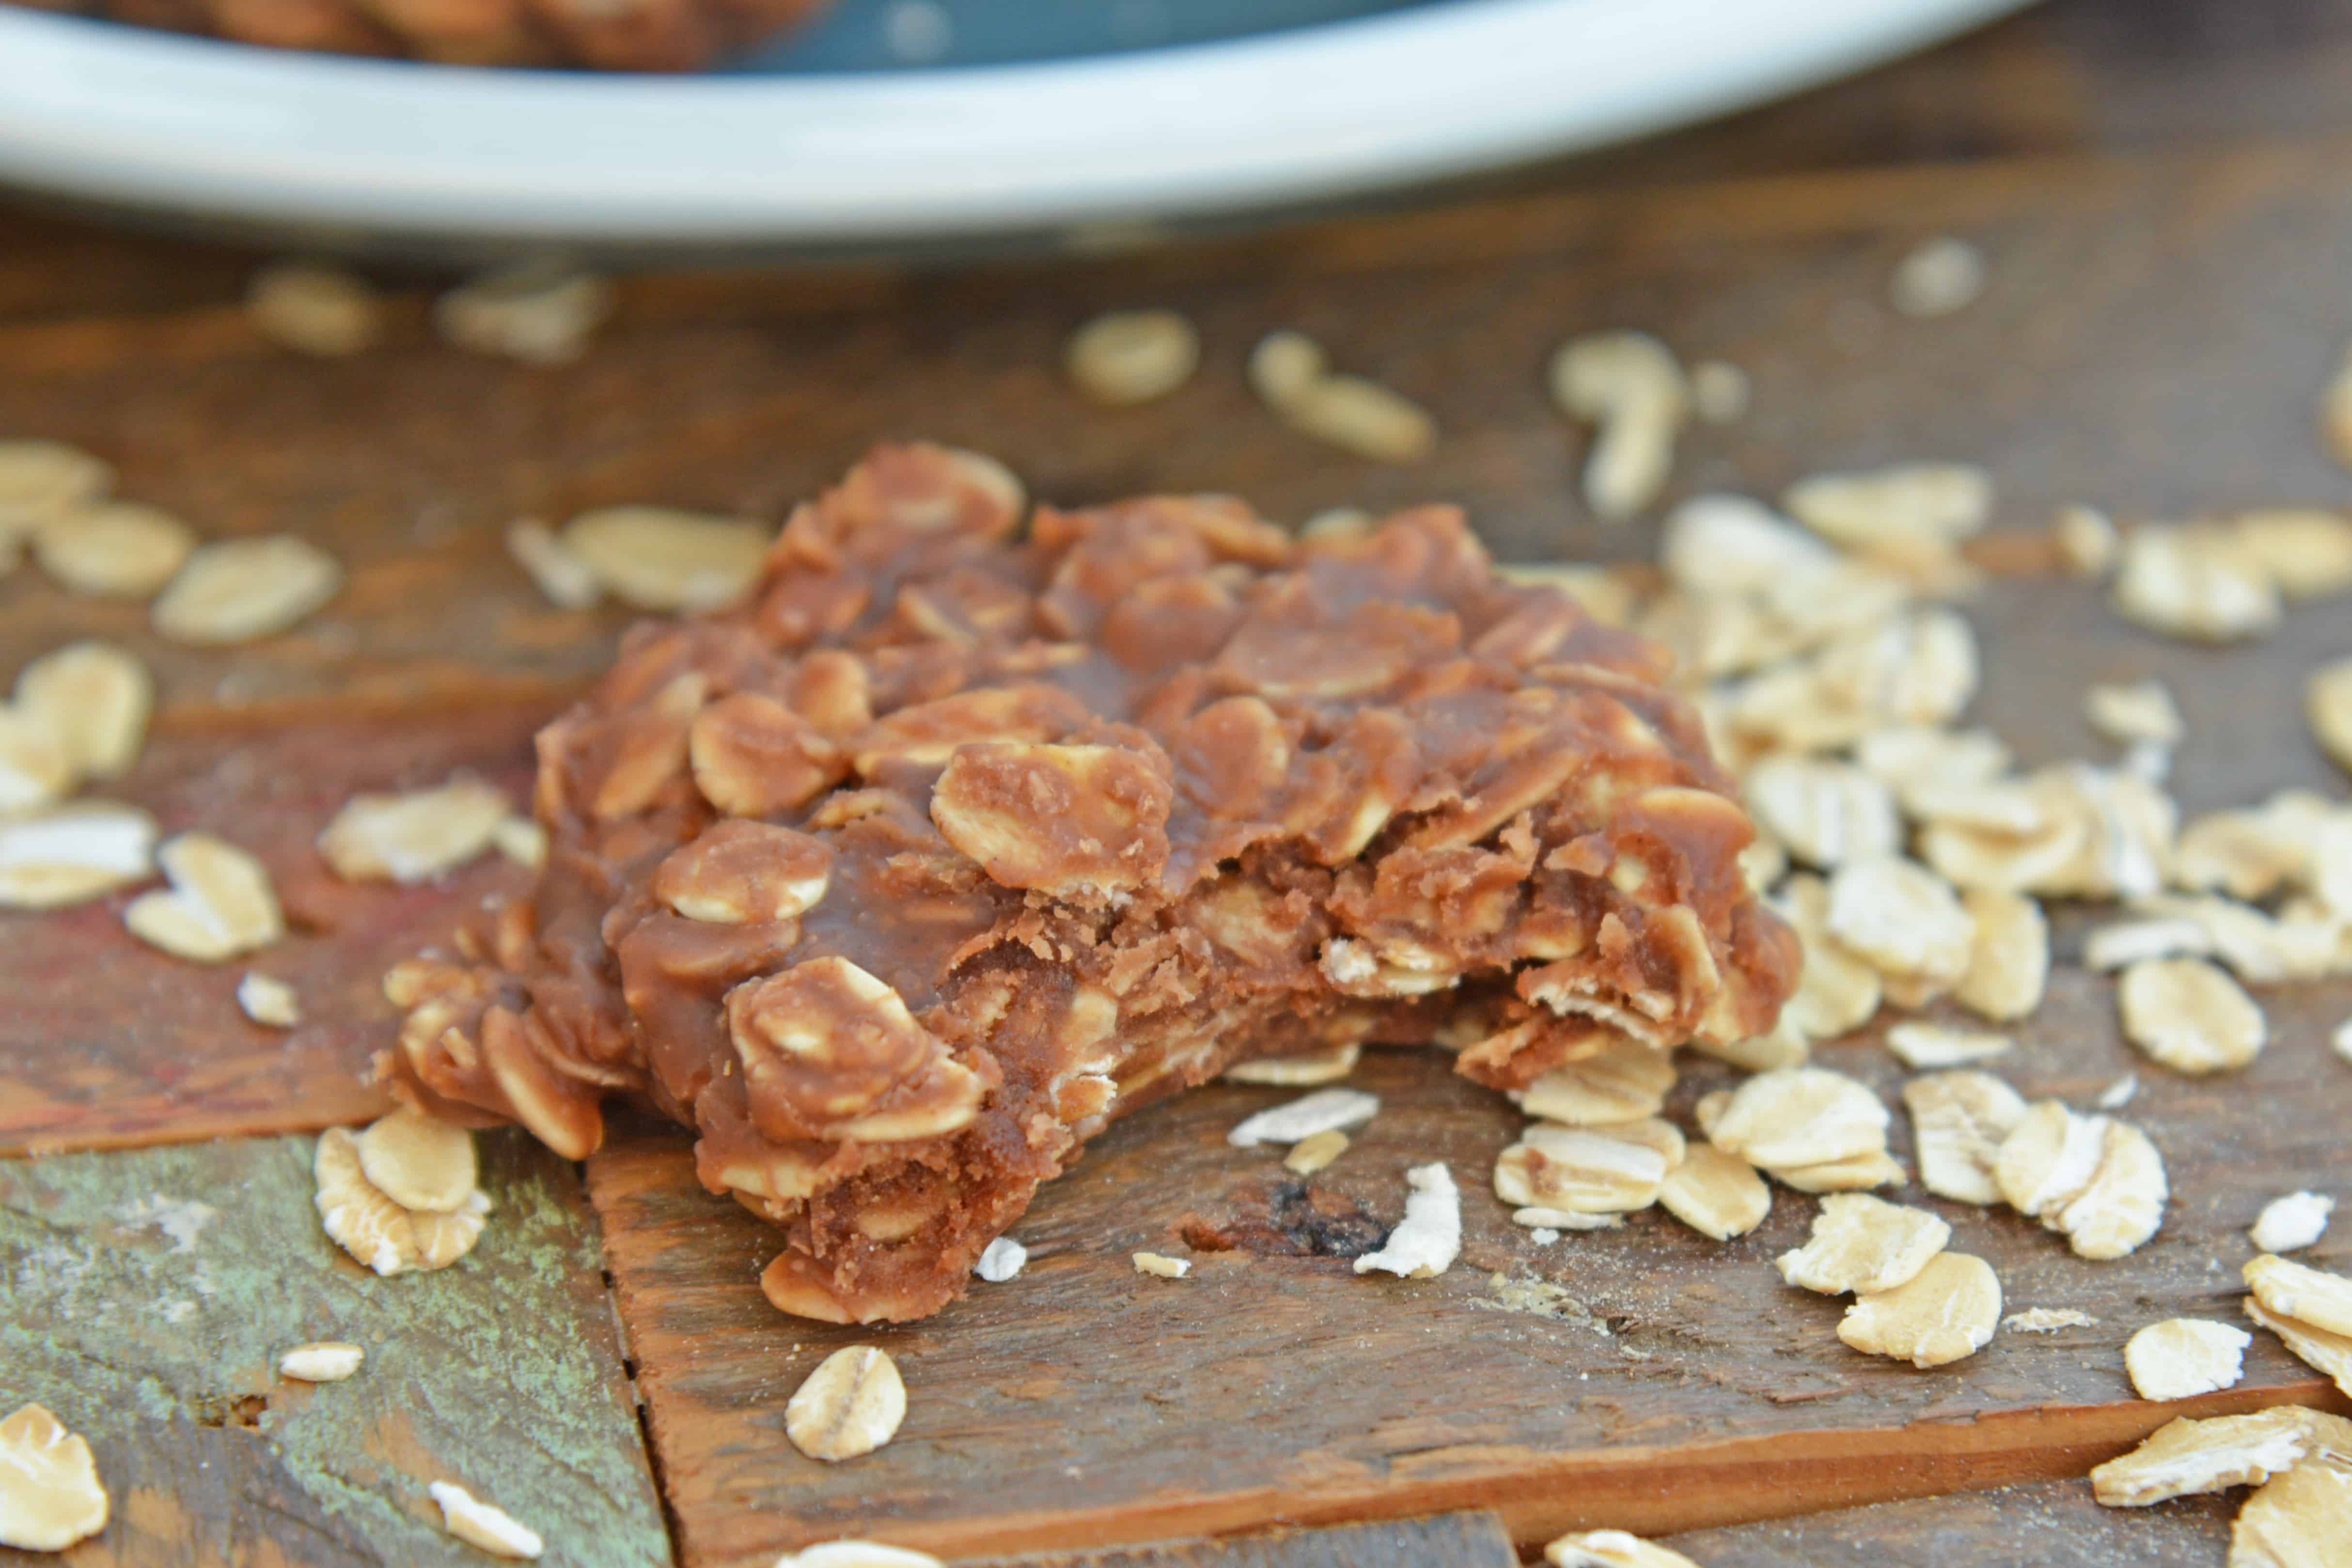 If you've always thought oatmeal no bake cookies were difficult, this classic no bake cookie recipe will change your mind. With these tips, you'll end up with the perfect peanut butter no bake cookies every time! #oatmealnobakecookies #classicnobakecookies www.savoryexperiments.com